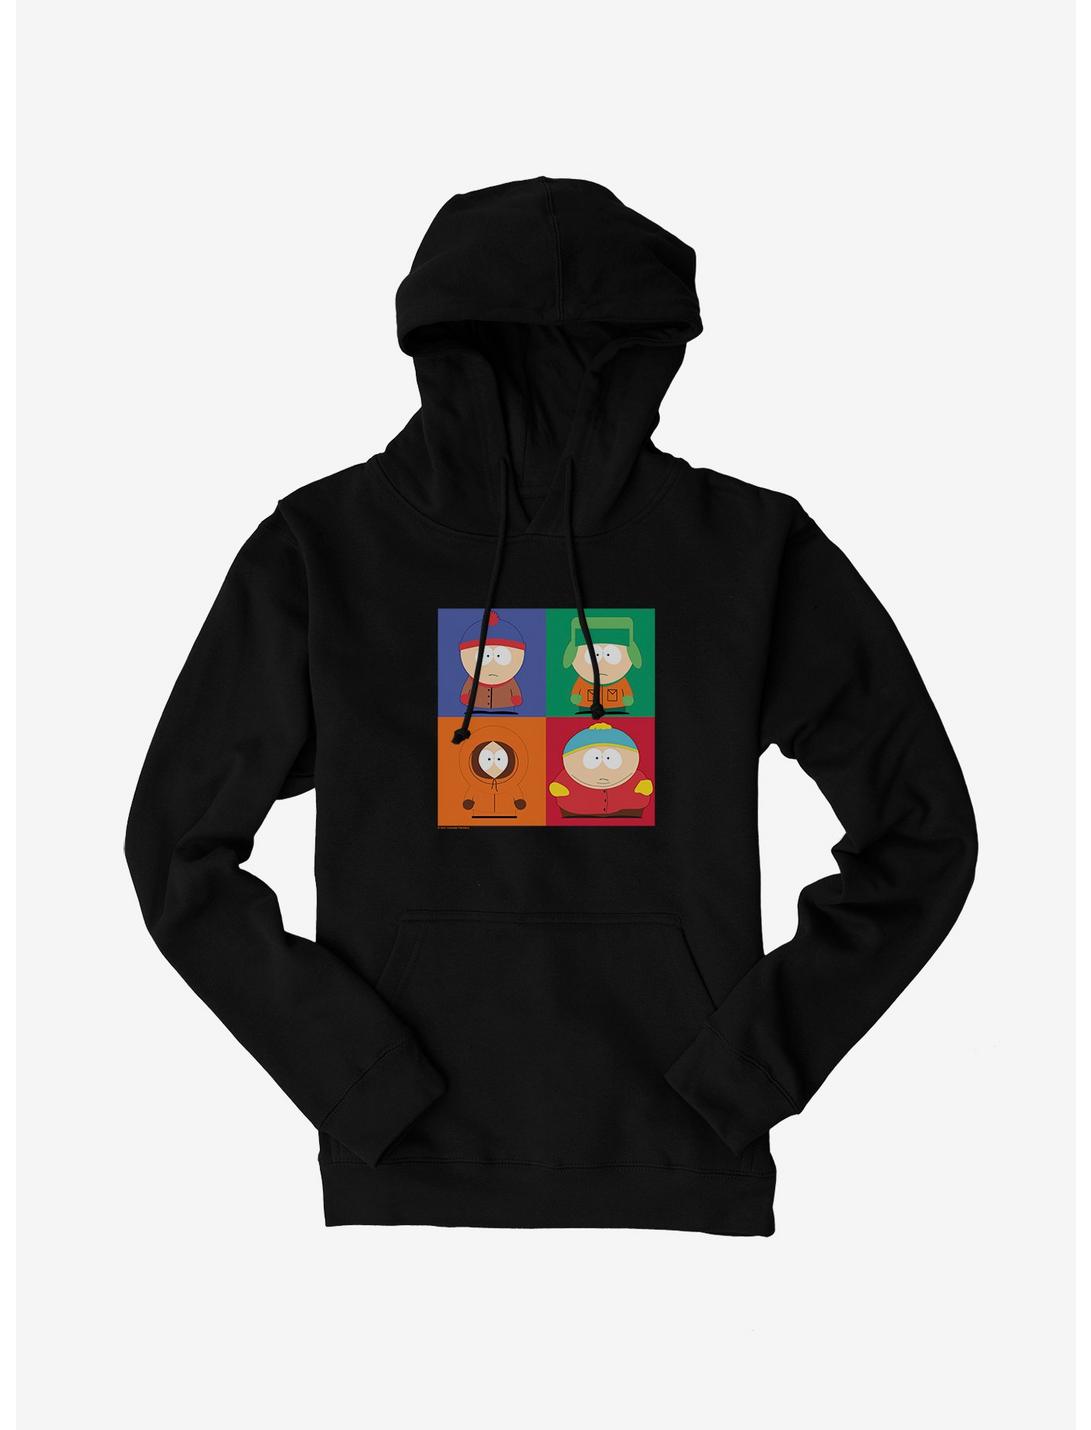 South Park The Boy Bunch Hoodie, , hi-res